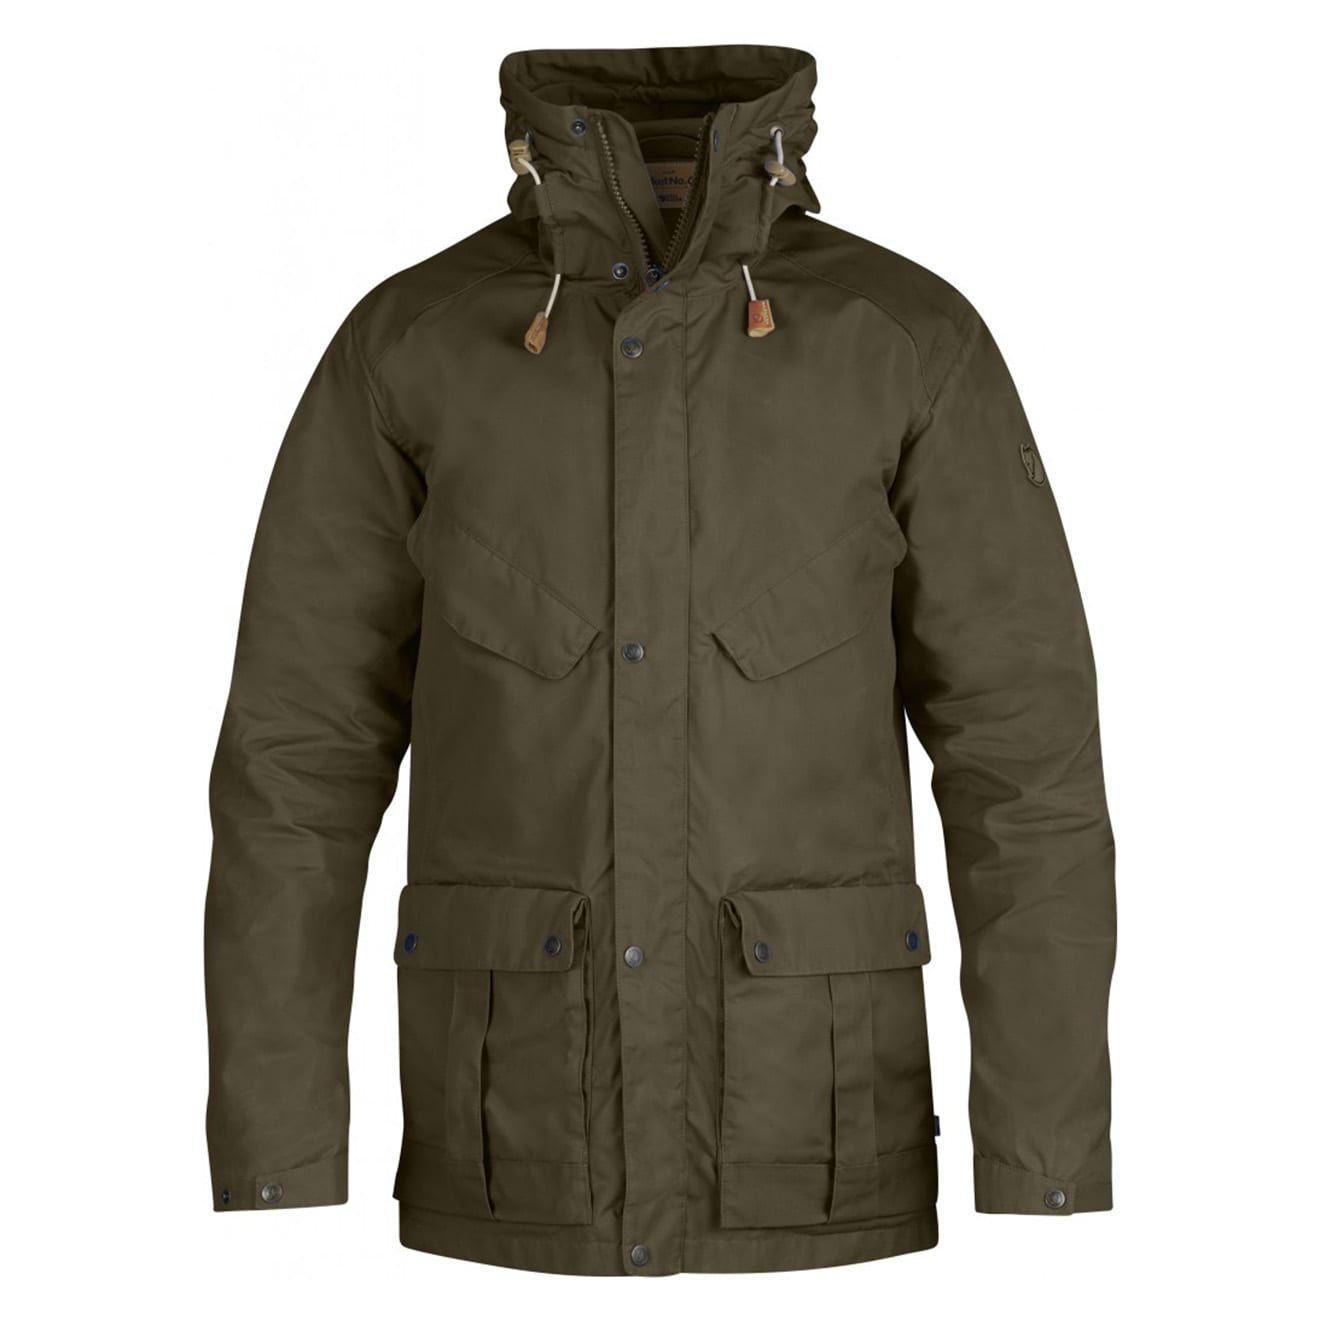 Fjallraven Clothing Logo - Fjallraven Clothing, Bags & Accessories - The Sporting Lodge